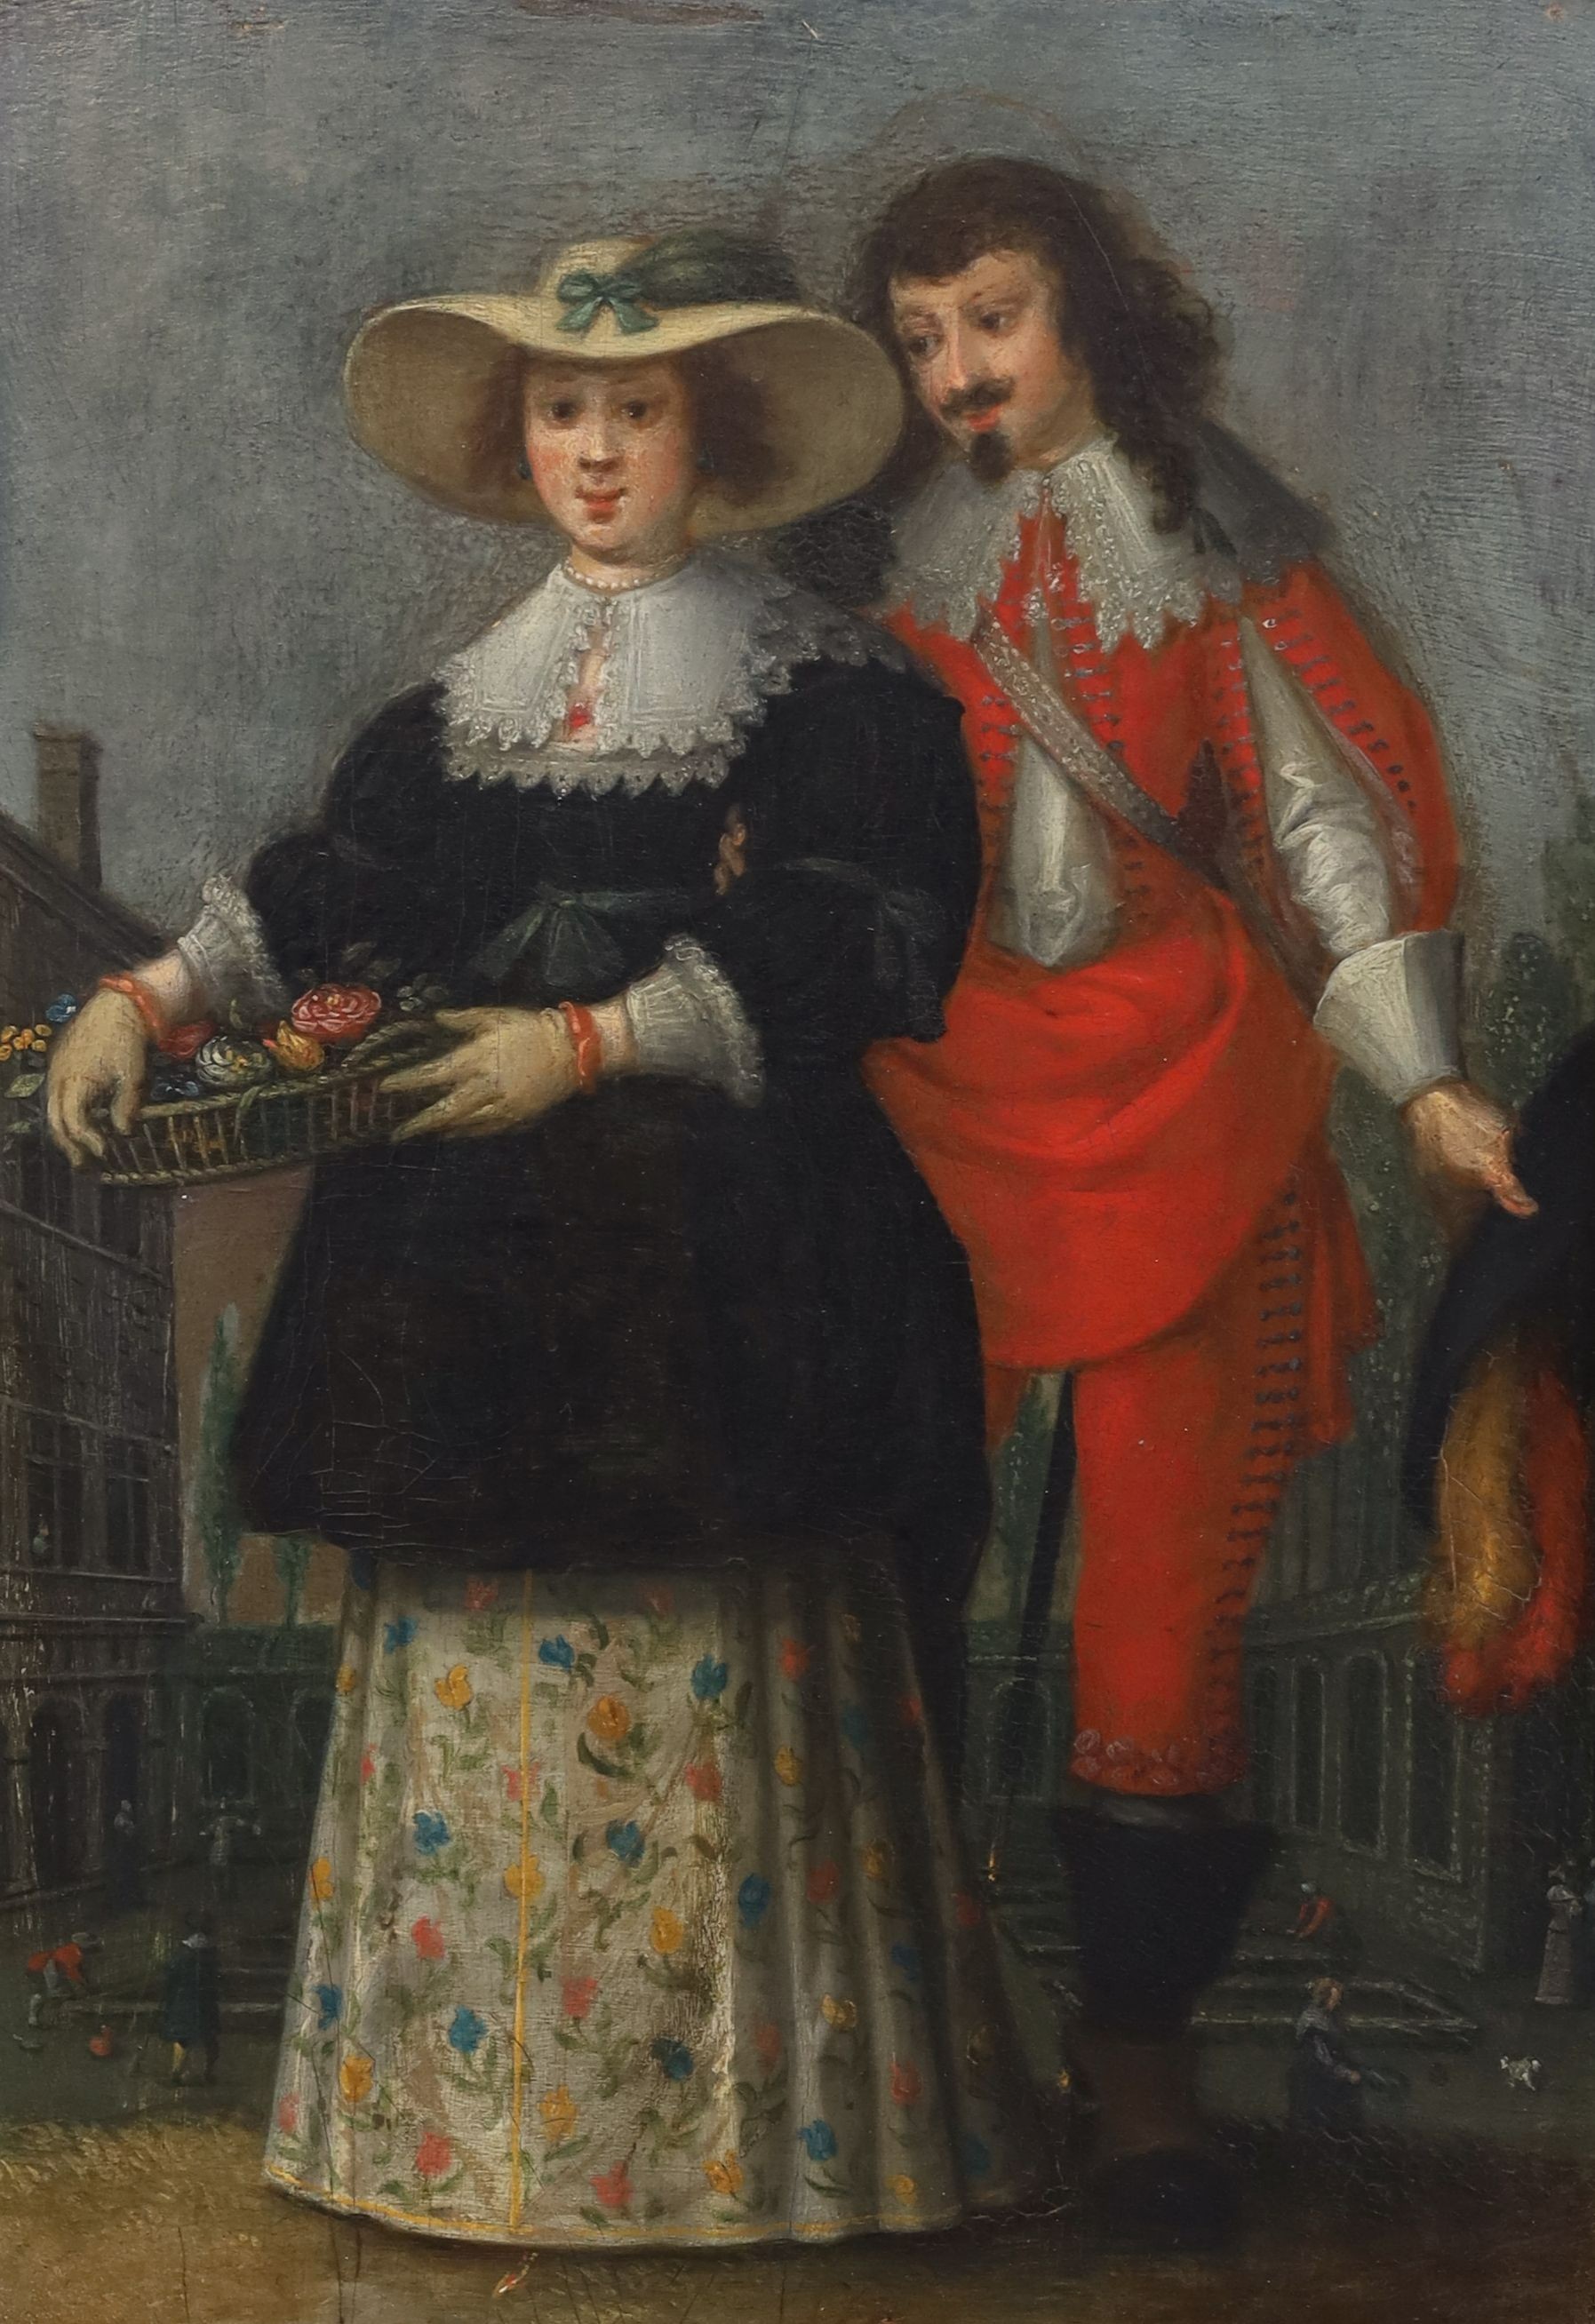 Follower of Nicolaes Eliazoon Pickenoy (Dutch, 1588-1656), Study of a courting couple, she holding a basket of flowers, he in a vermillion suit, a courtyard beyond, oil on wooden panel, 34 x 23.5cm